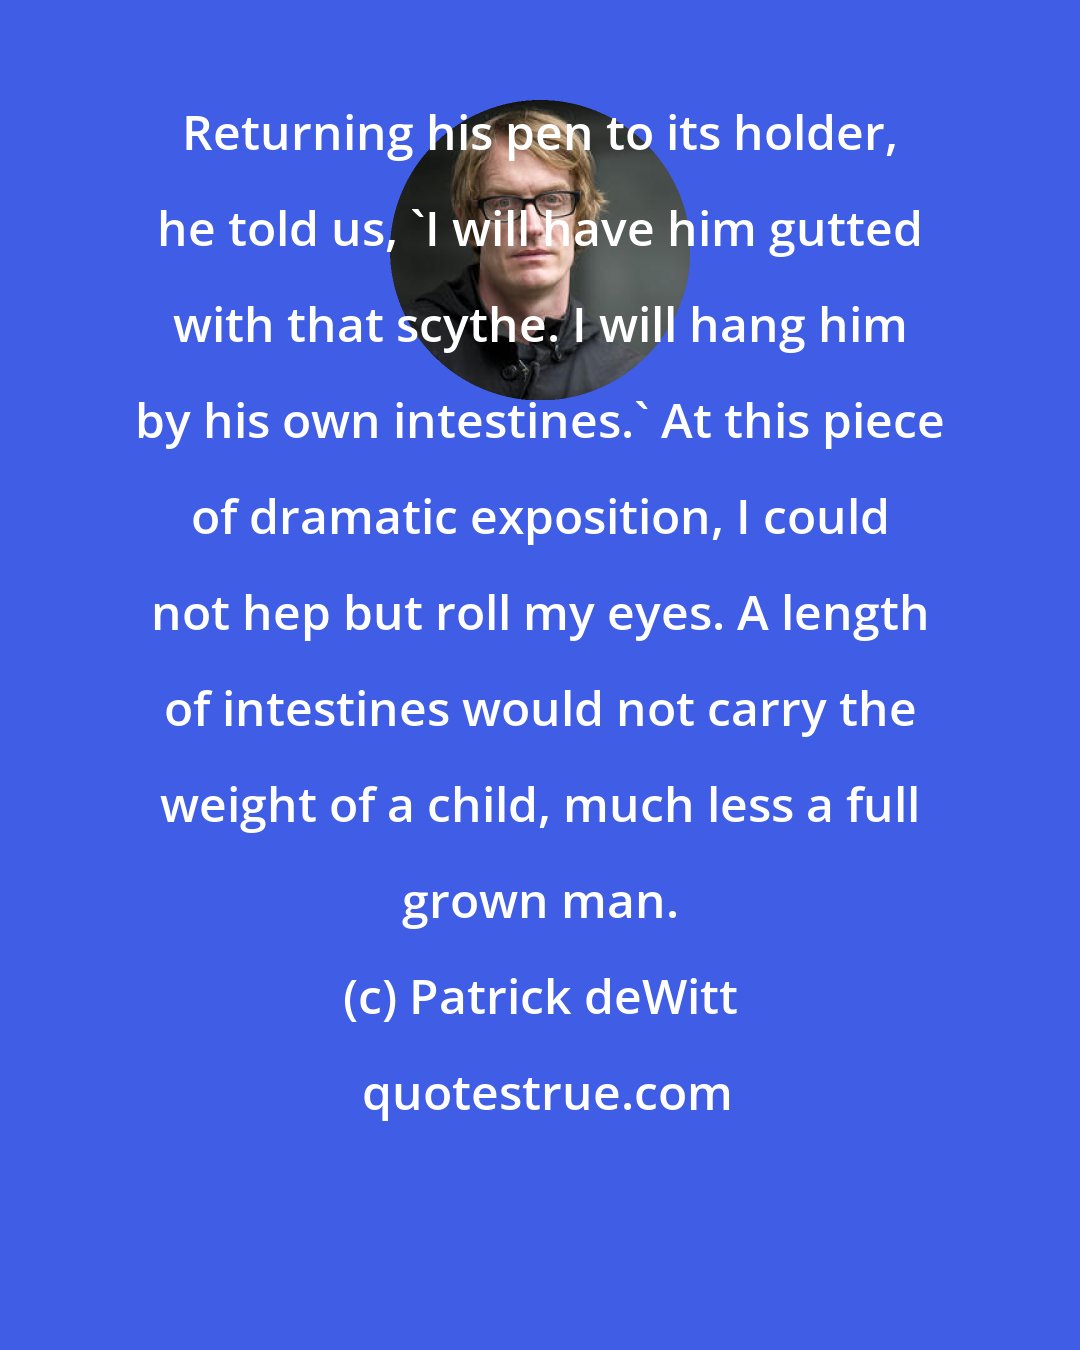 Patrick deWitt: Returning his pen to its holder, he told us, 'I will have him gutted with that scythe. I will hang him by his own intestines.' At this piece of dramatic exposition, I could not hep but roll my eyes. A length of intestines would not carry the weight of a child, much less a full grown man.